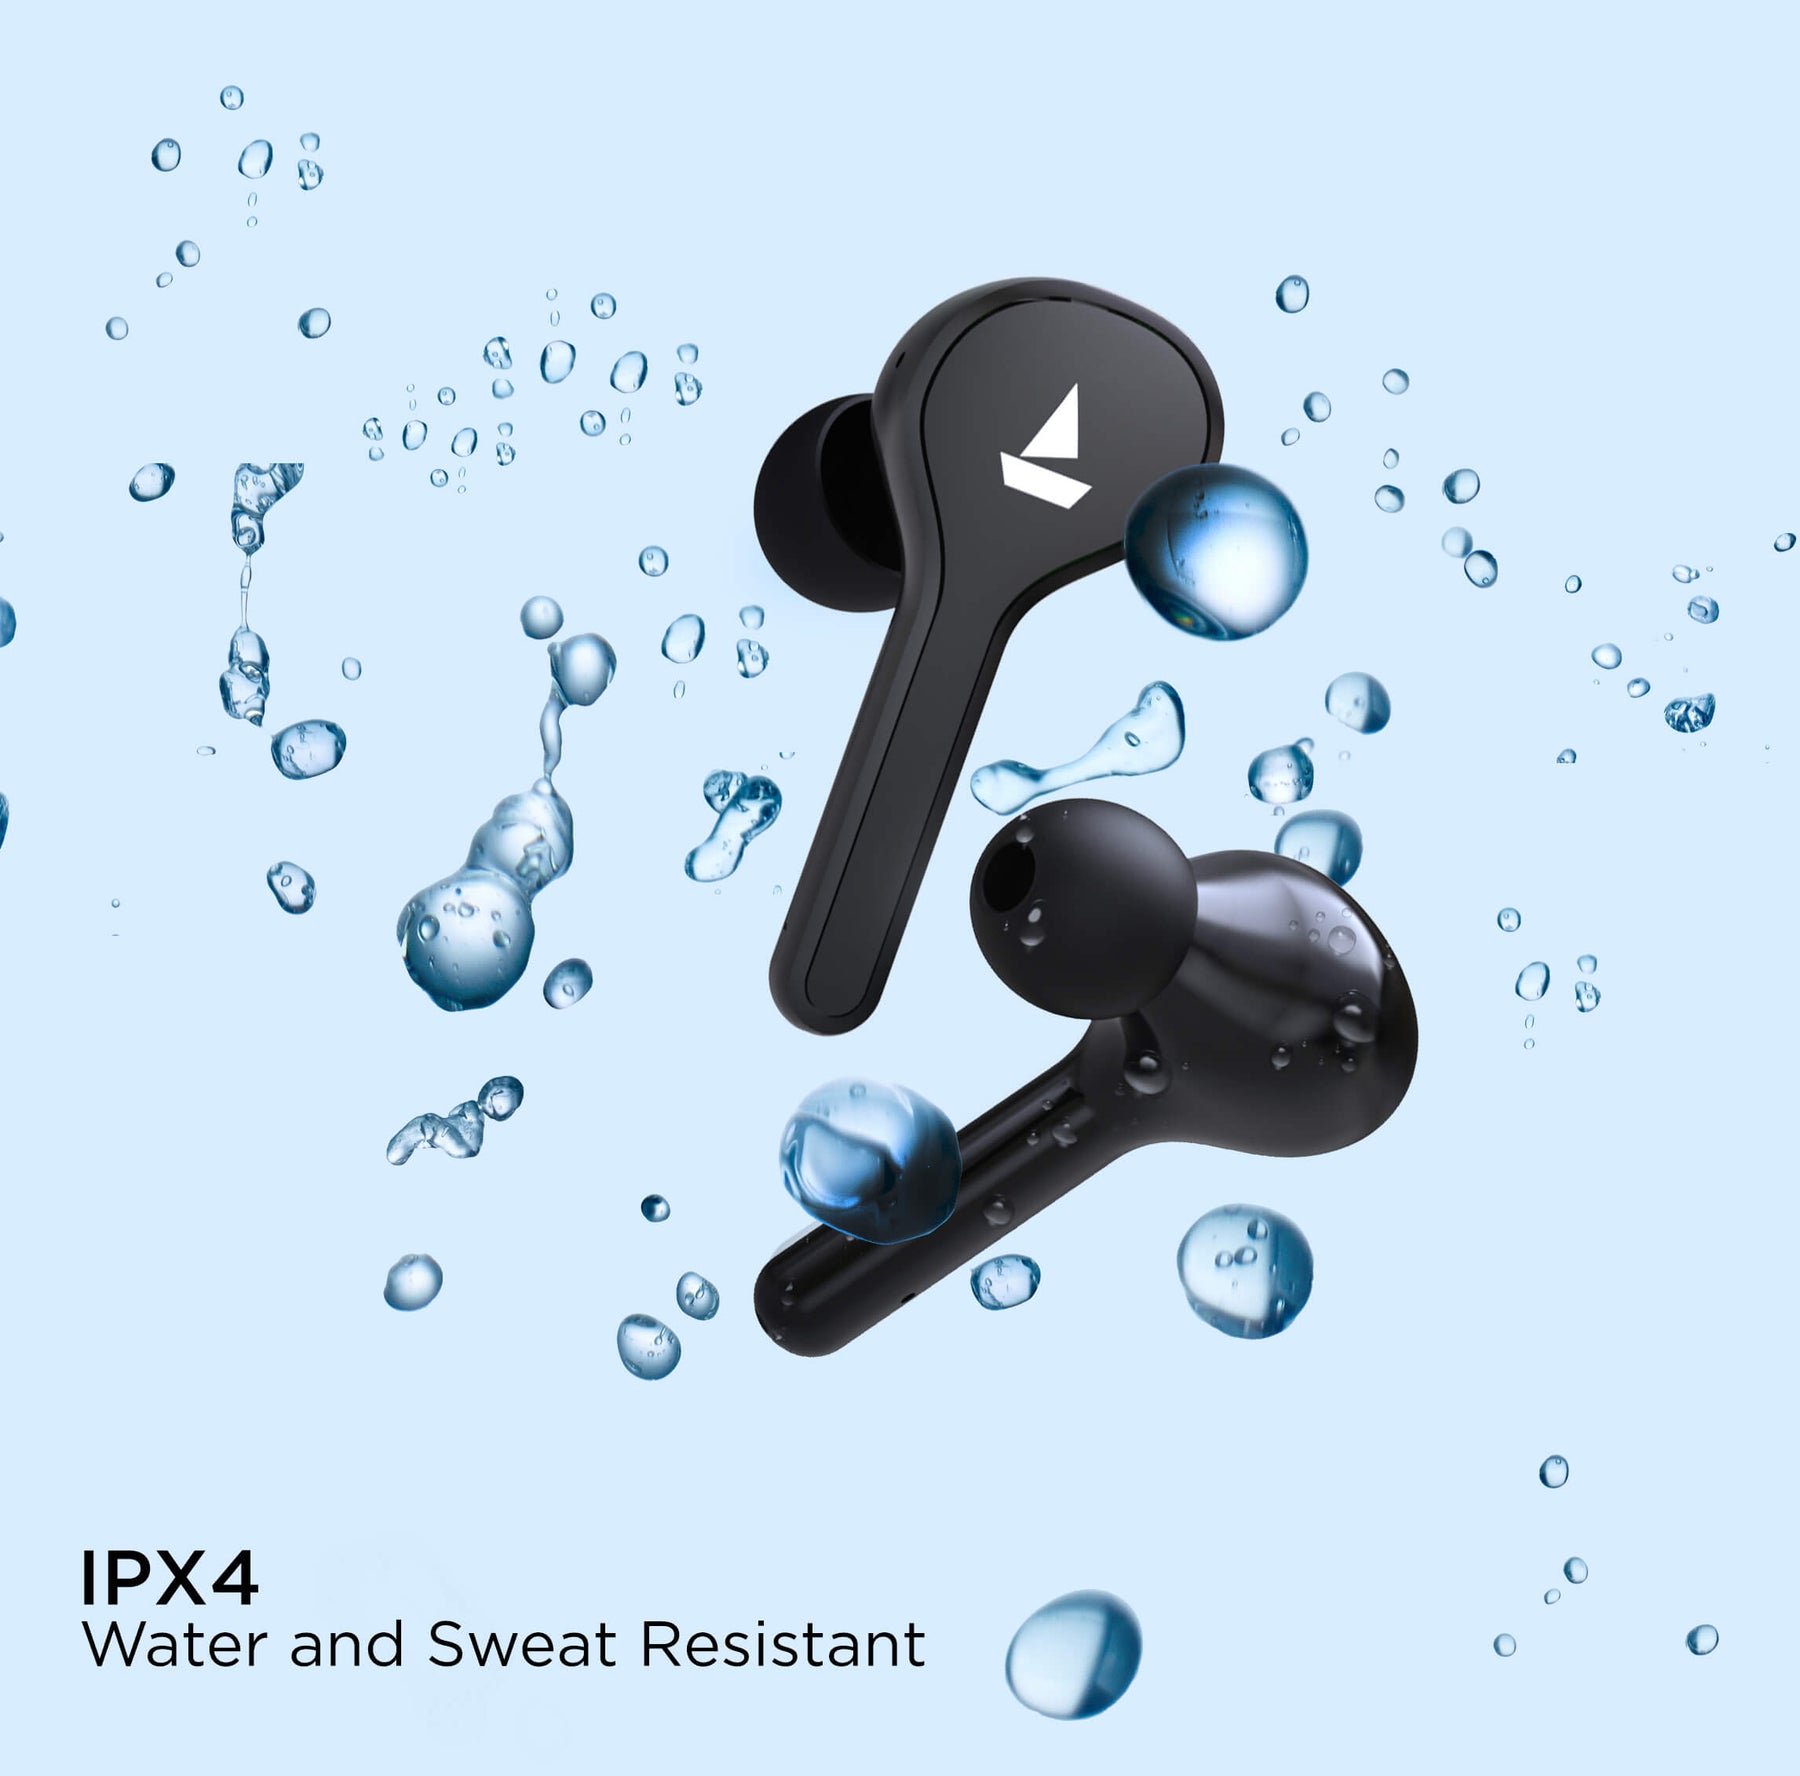 boAt Airdopes 431 | Wireless Earbuds 7mm Drivers, IPX4 Sweat & Water Resistance, Bluetooth 5.0, 500mAh Charging Case